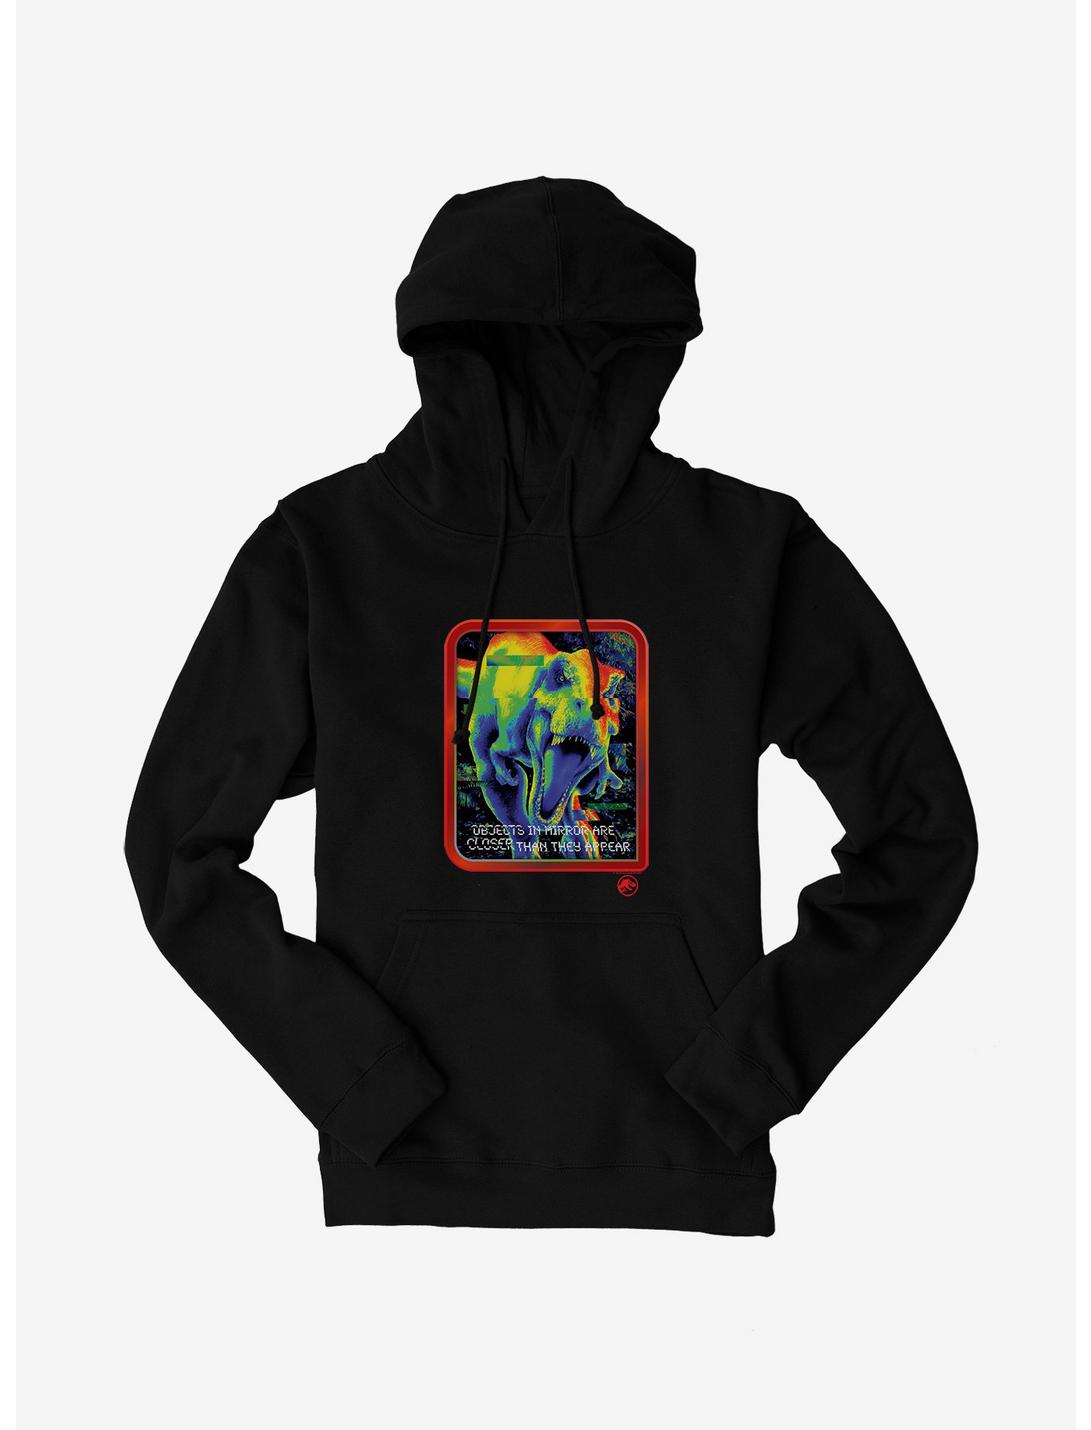 Jurassic World Objects In Mirror Are Closer Than They Appear Hoodie, , hi-res